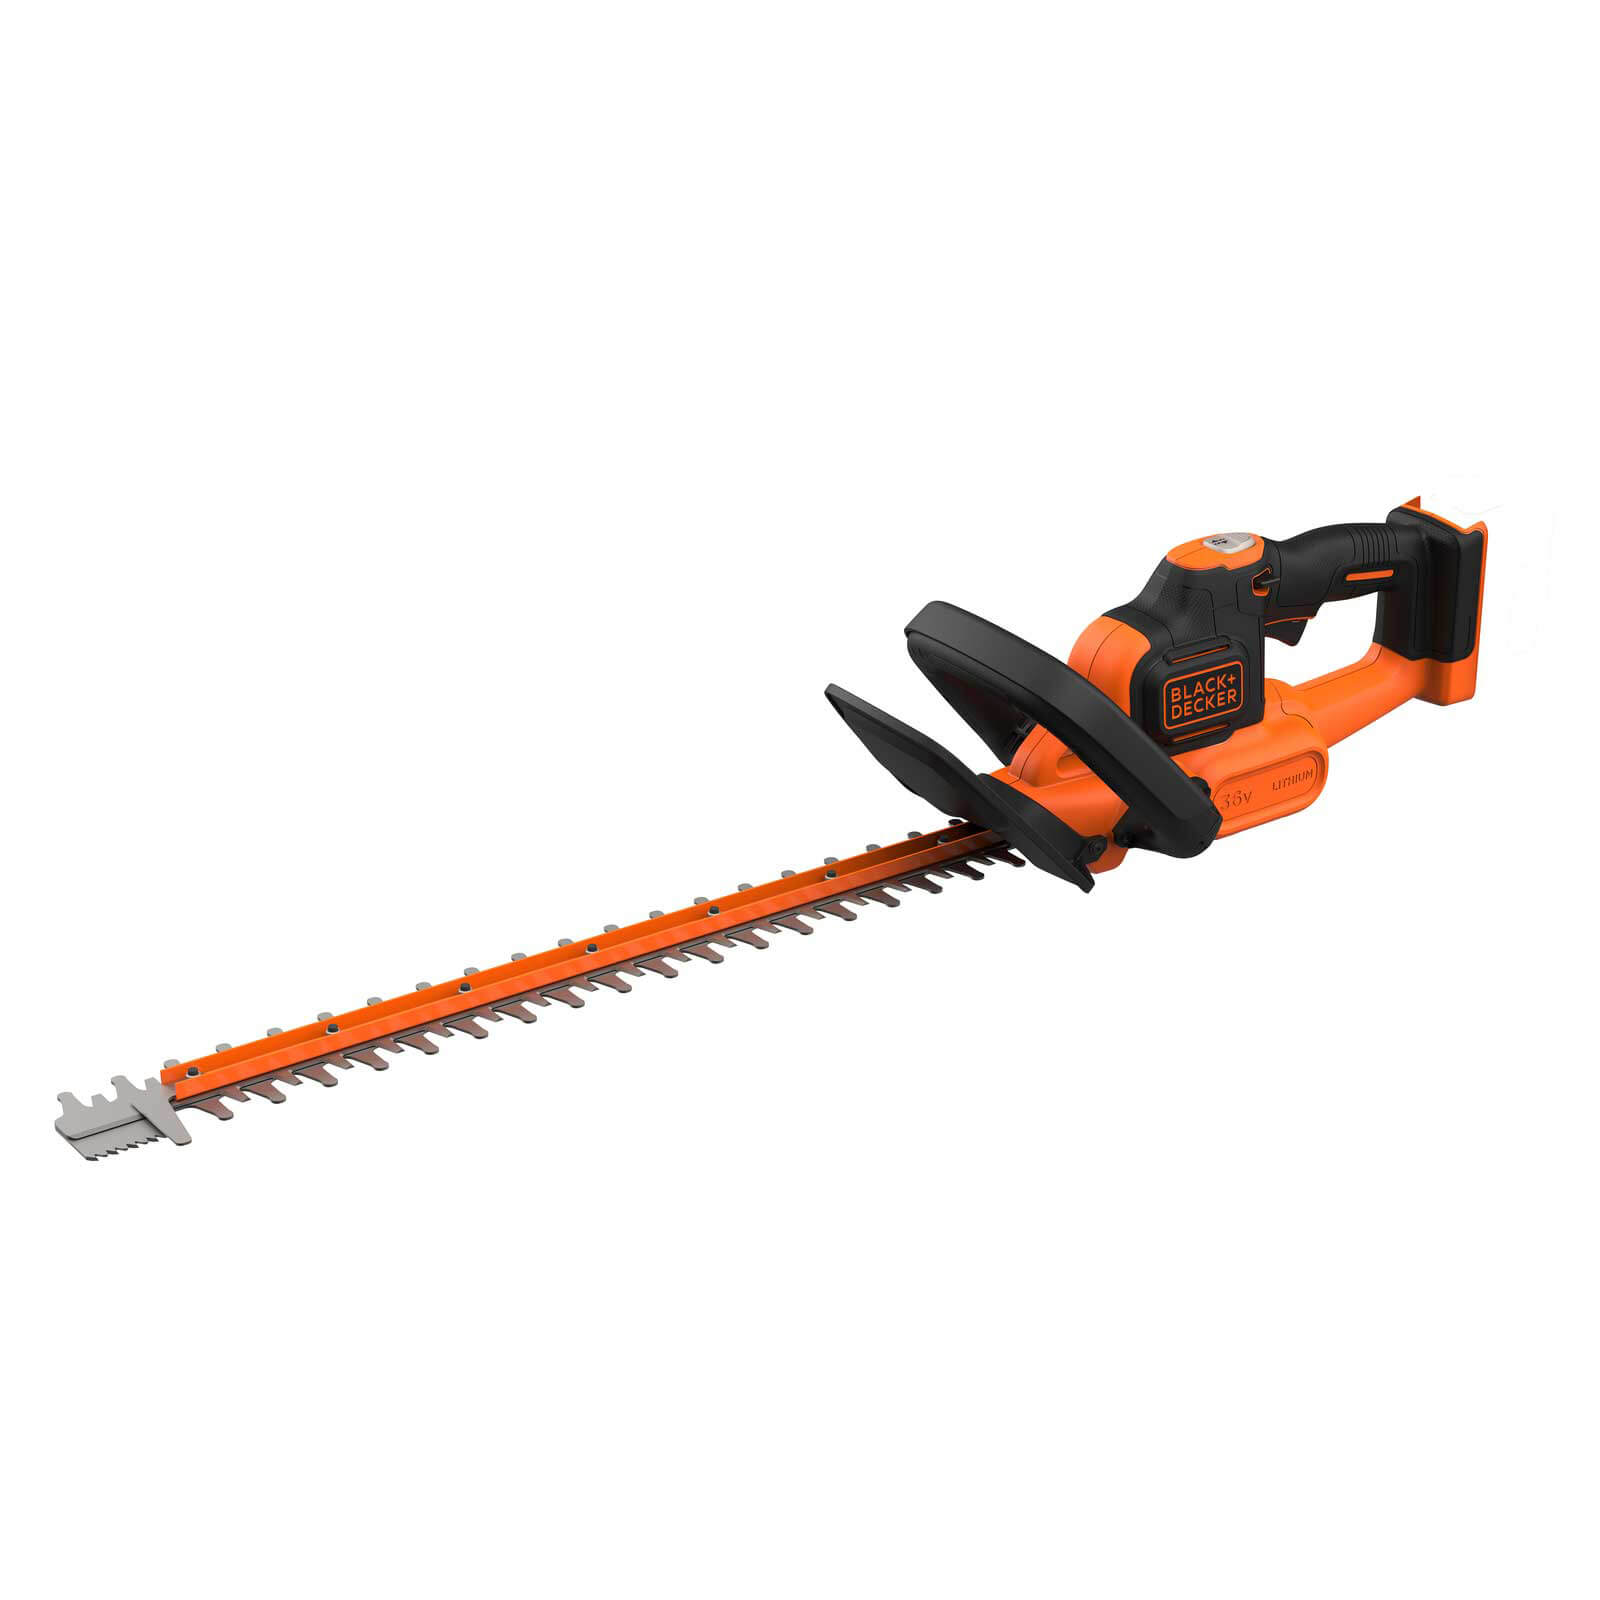 Image of Black and Decker BCHTS3620 36v Cordless Hedge Trimmer 550mm No Batteries No Charger